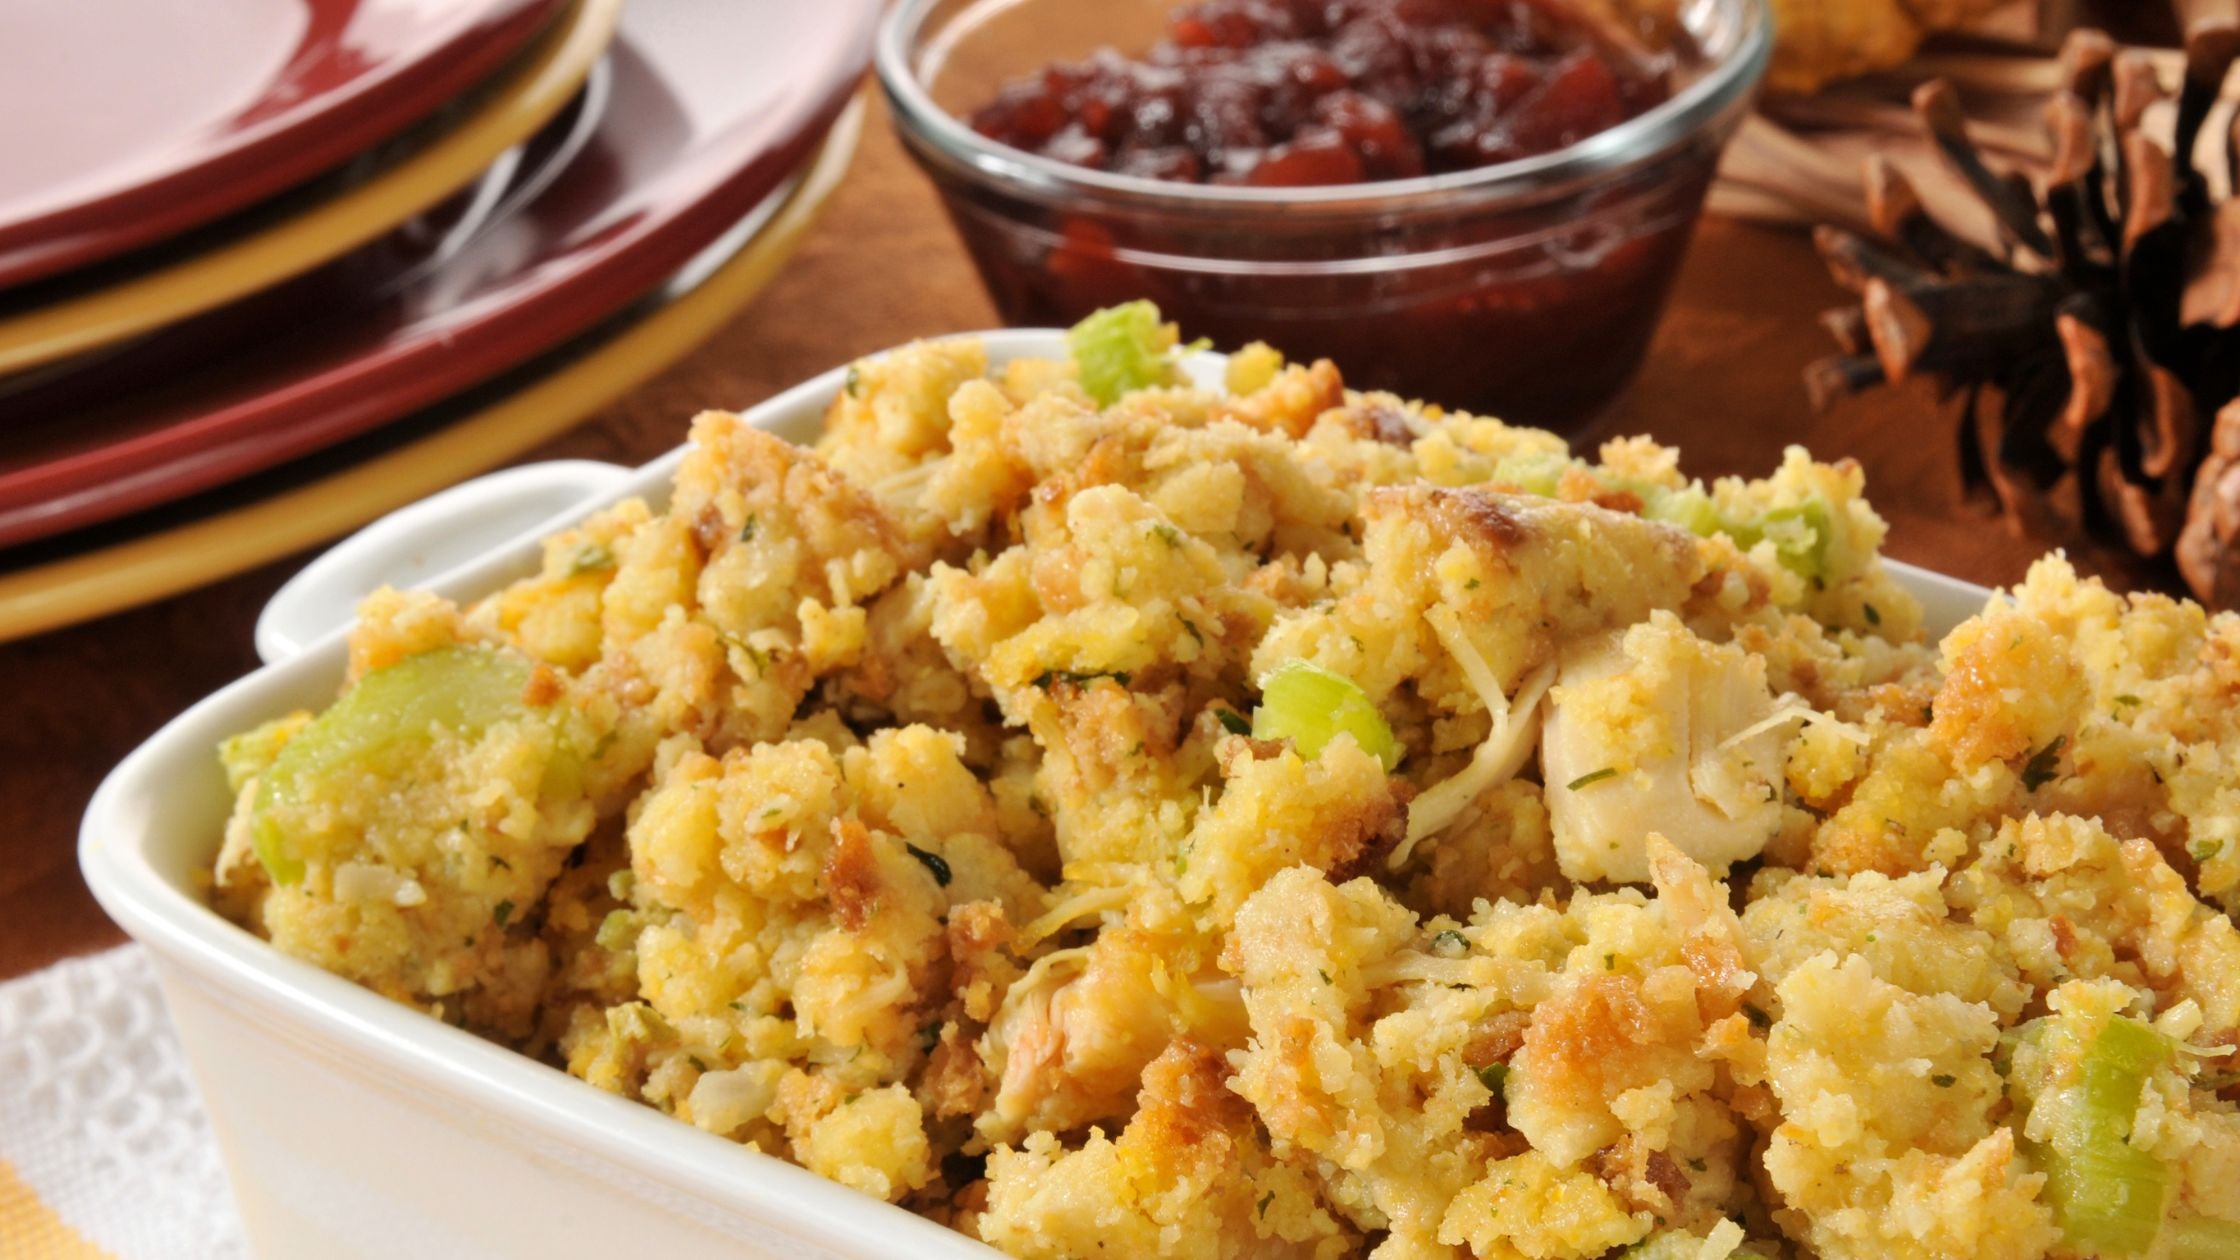 This holiday season, elevate your feast with the power of PINES Wheat Grass Corn Bread Stuffing.